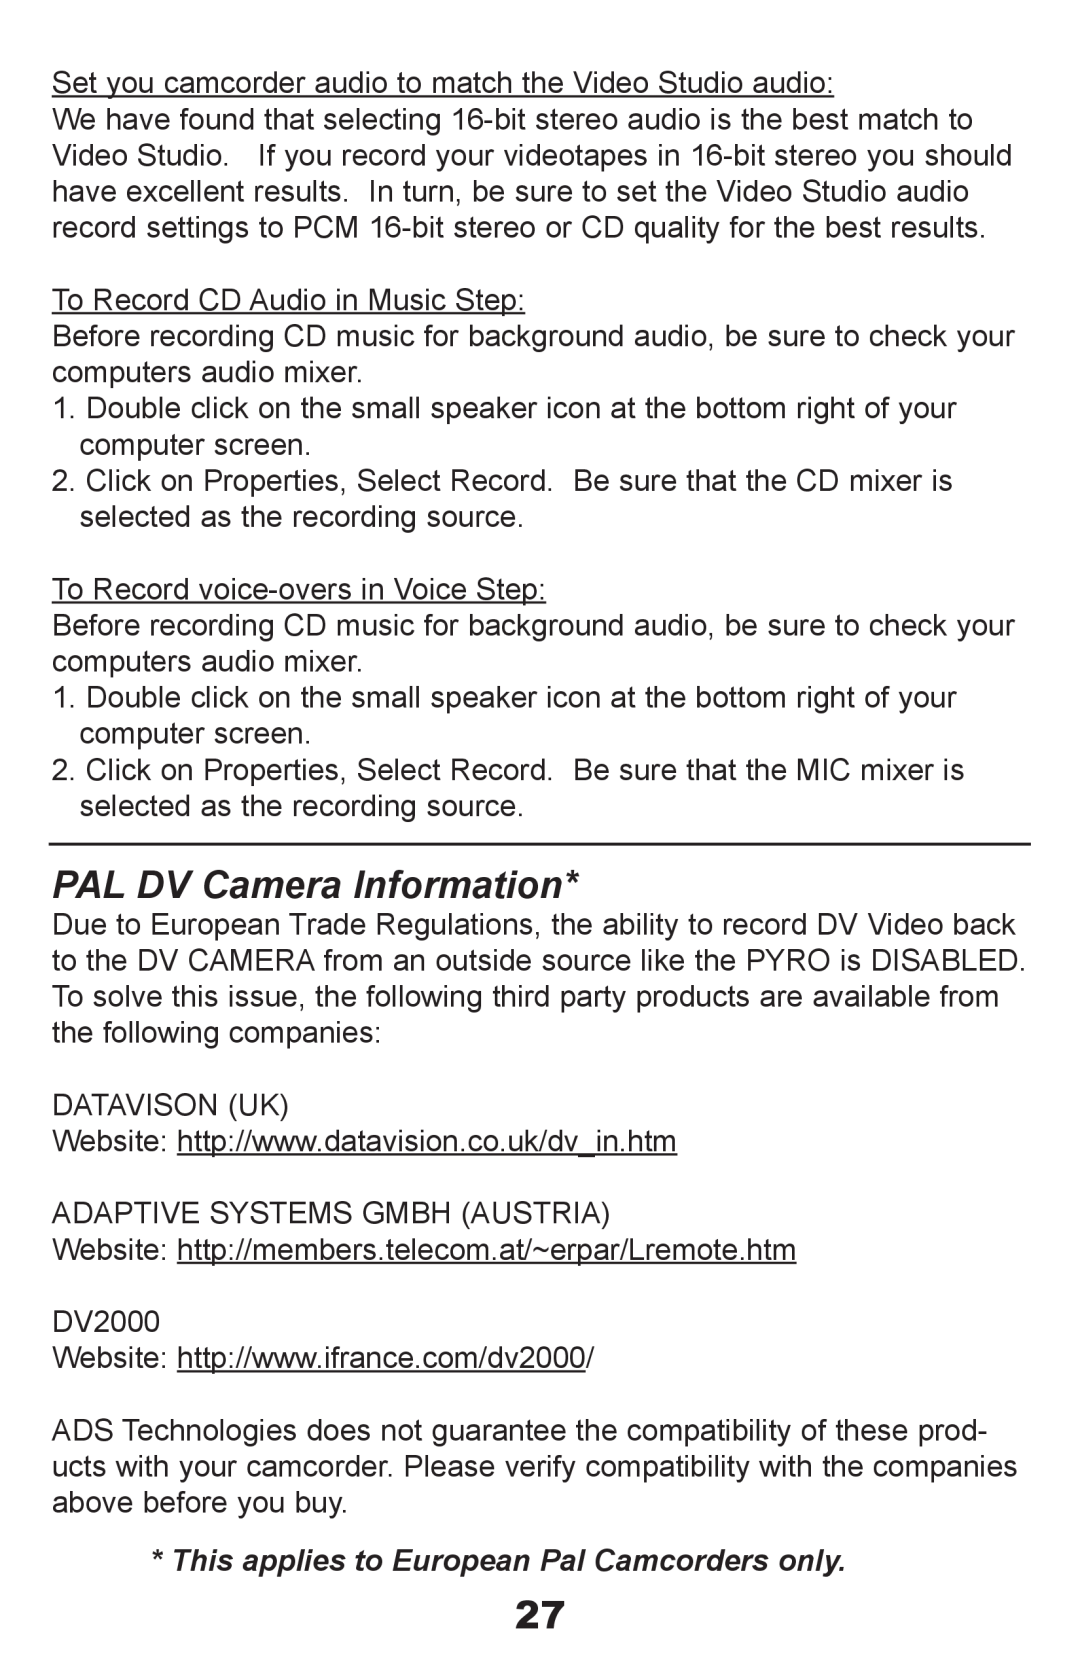 ADS Technologies API-408 manual PAL DV Camera Information, This applies to European Pal Camcorders only 